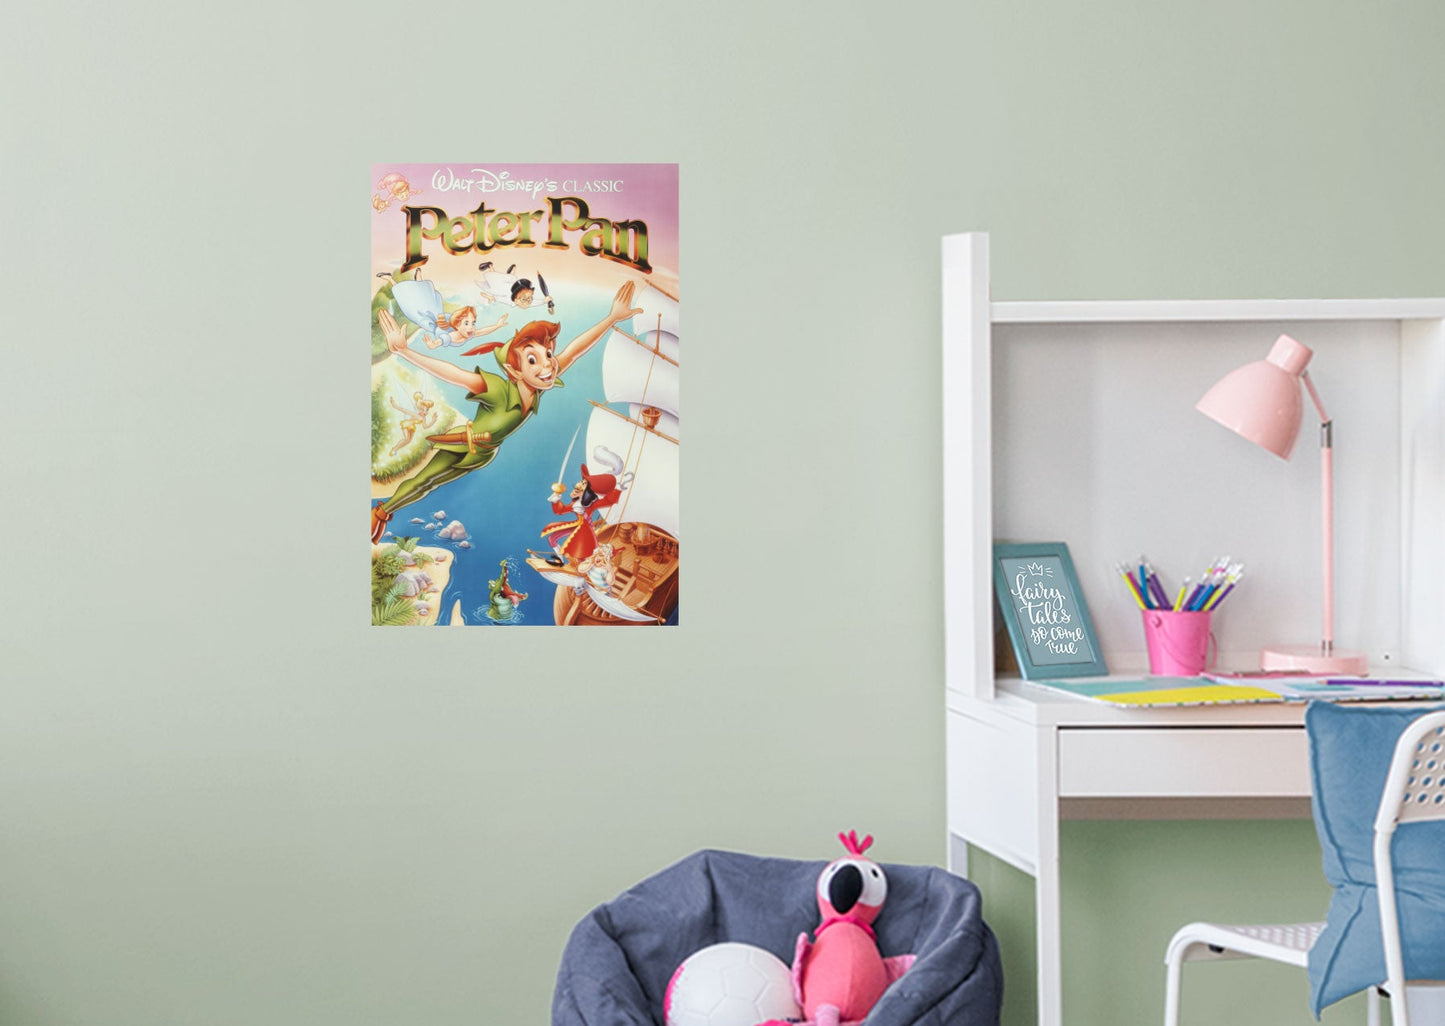 Peter Pan:  Movie Poster Mural        - Officially Licensed Disney Removable Wall   Adhesive Decal